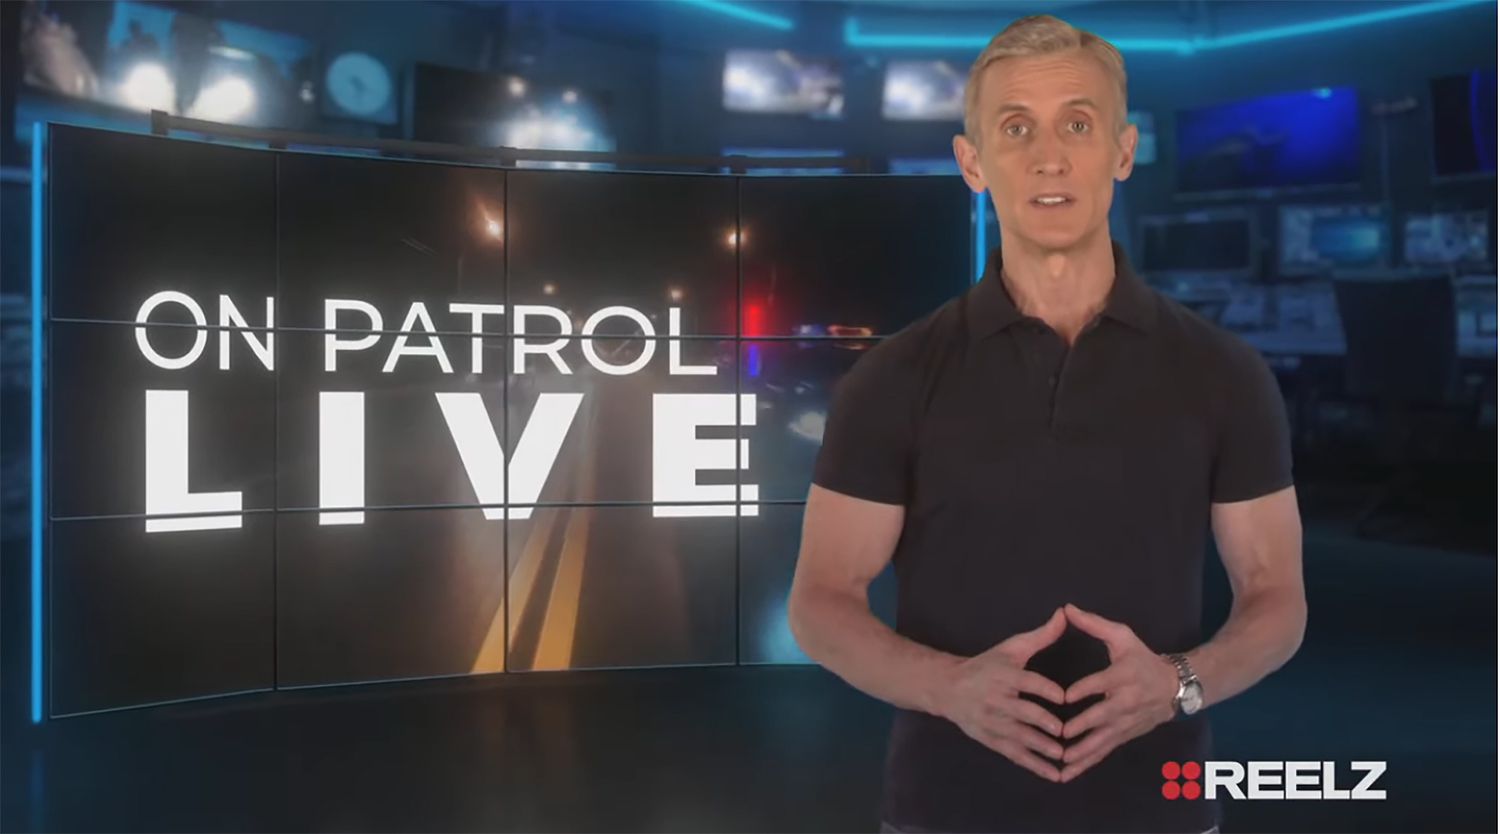 'On Patrol: Live' hosts joke about premiere problems: 'Quite a first night we had last night'